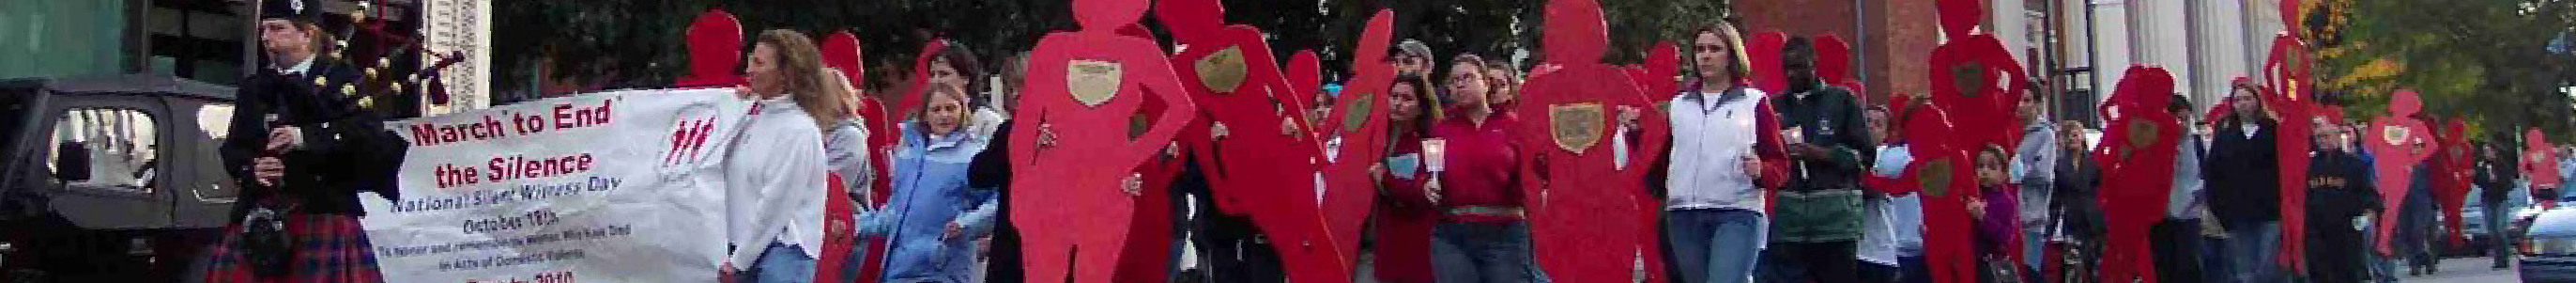 banner image: Silent Witness March. People Marching with red shilohet cardboard cutouts